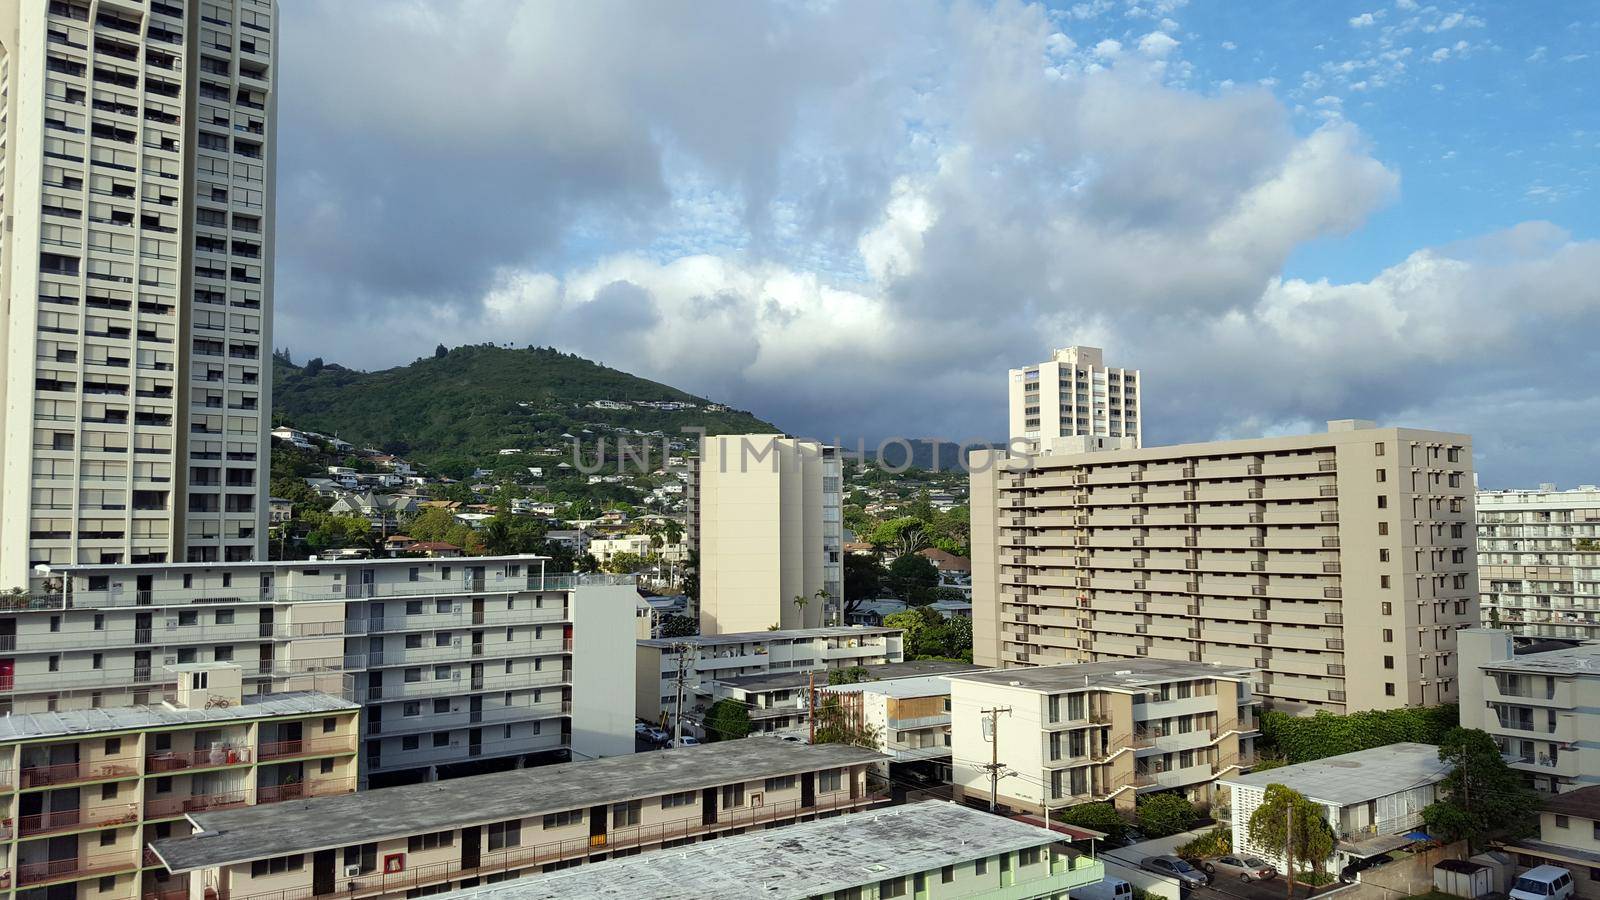 Makiki neighborhood, and Tantalus Mountain with houses and modern highrises, and other small buildings on a beautiful day on Oahu, Hawaii June 2016.